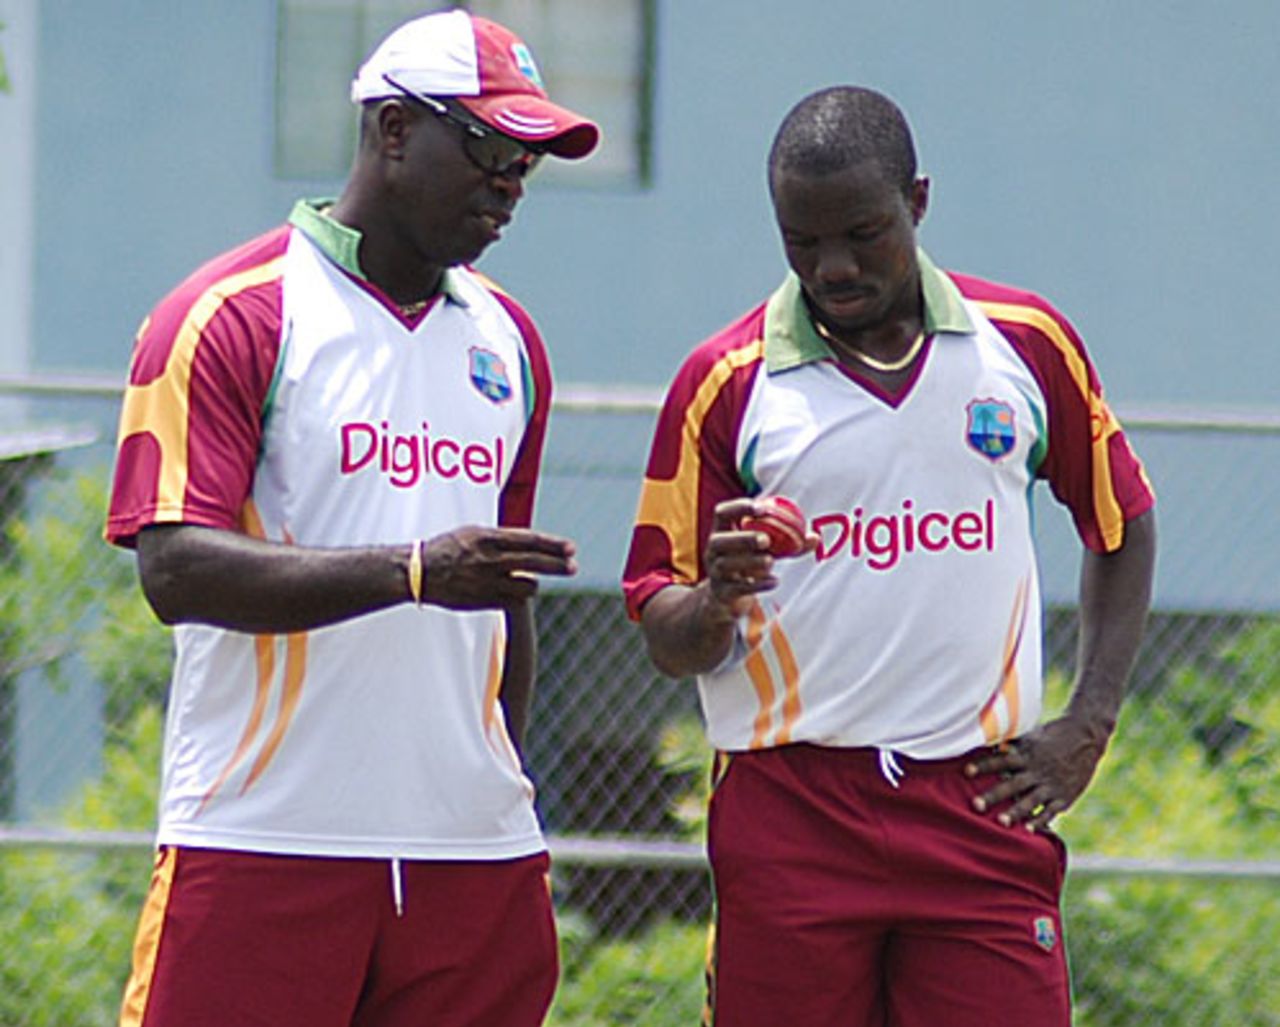 Nelon Pascal and Ottis Gibson share a word during practice, Trinidad, June 9, 2010